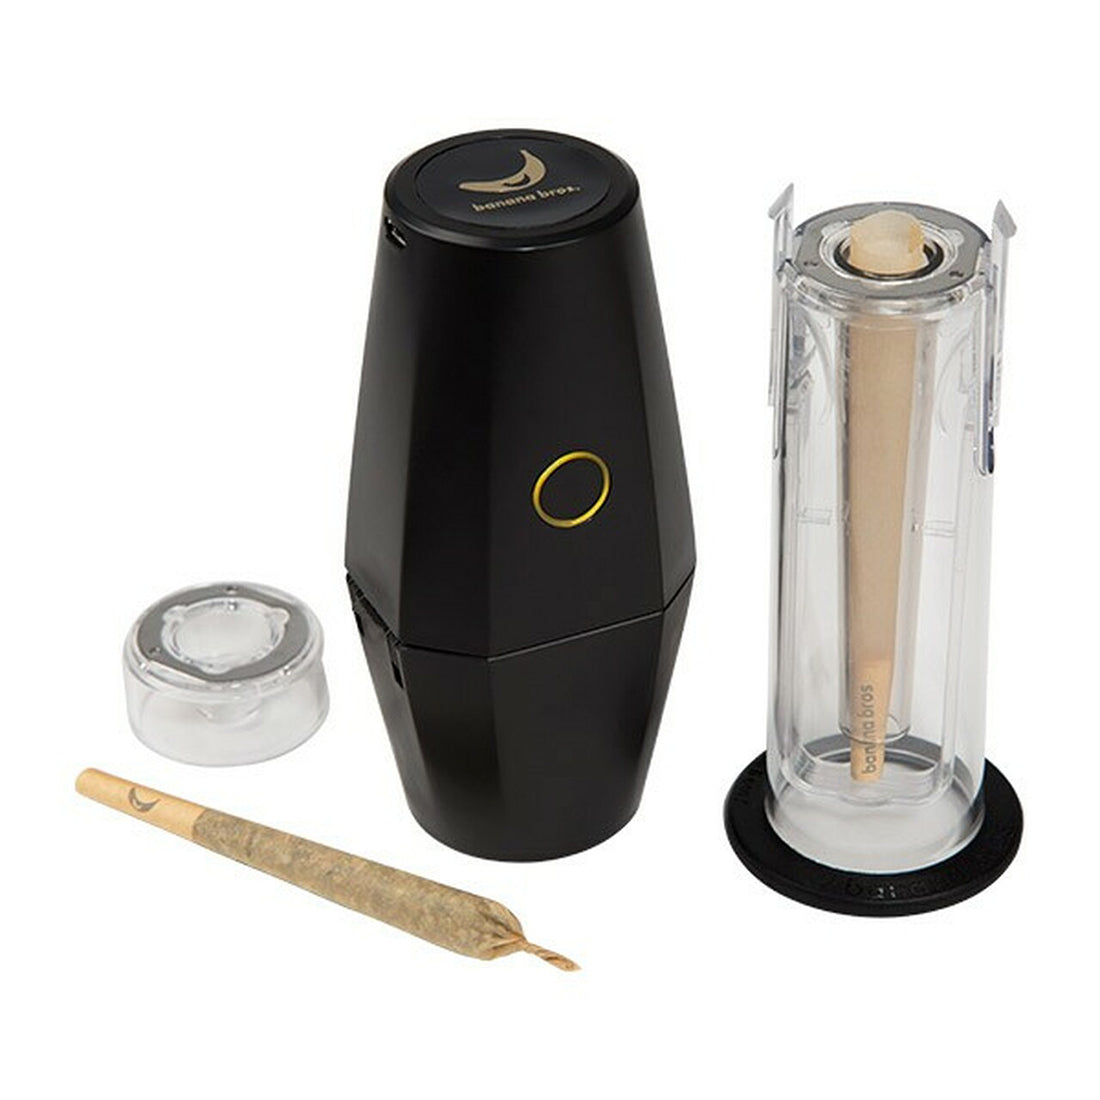 OTTO Auto Grinder and Cone Roller by Banana Bros – Always Chronic